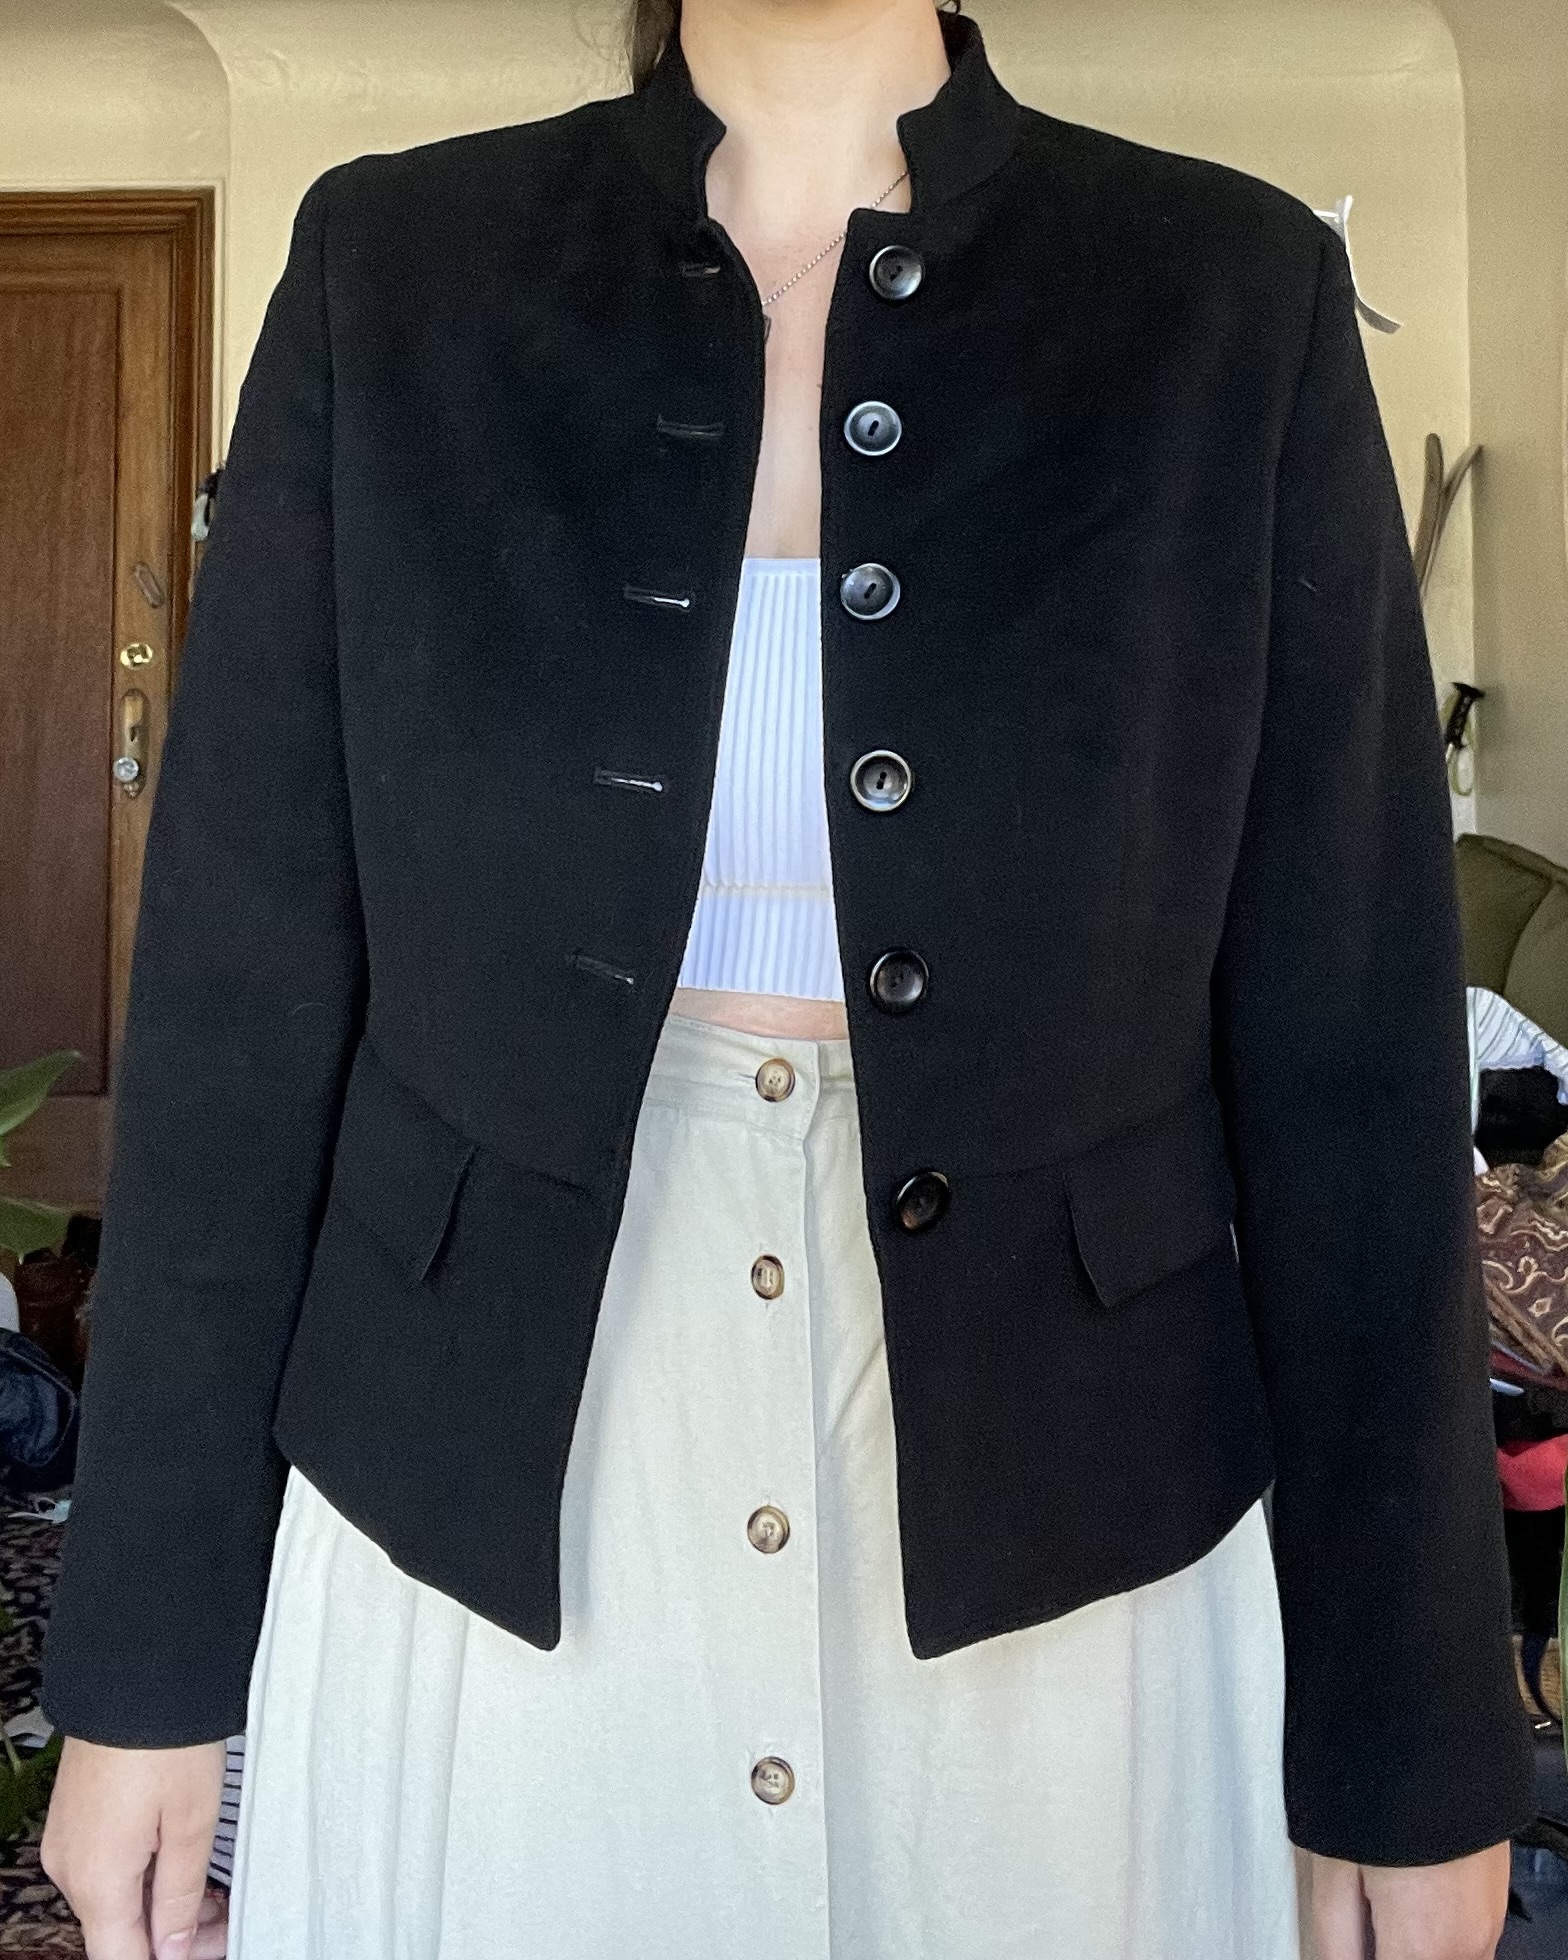 girl wearing a plain black jacket with buttons up the front, shown from the front